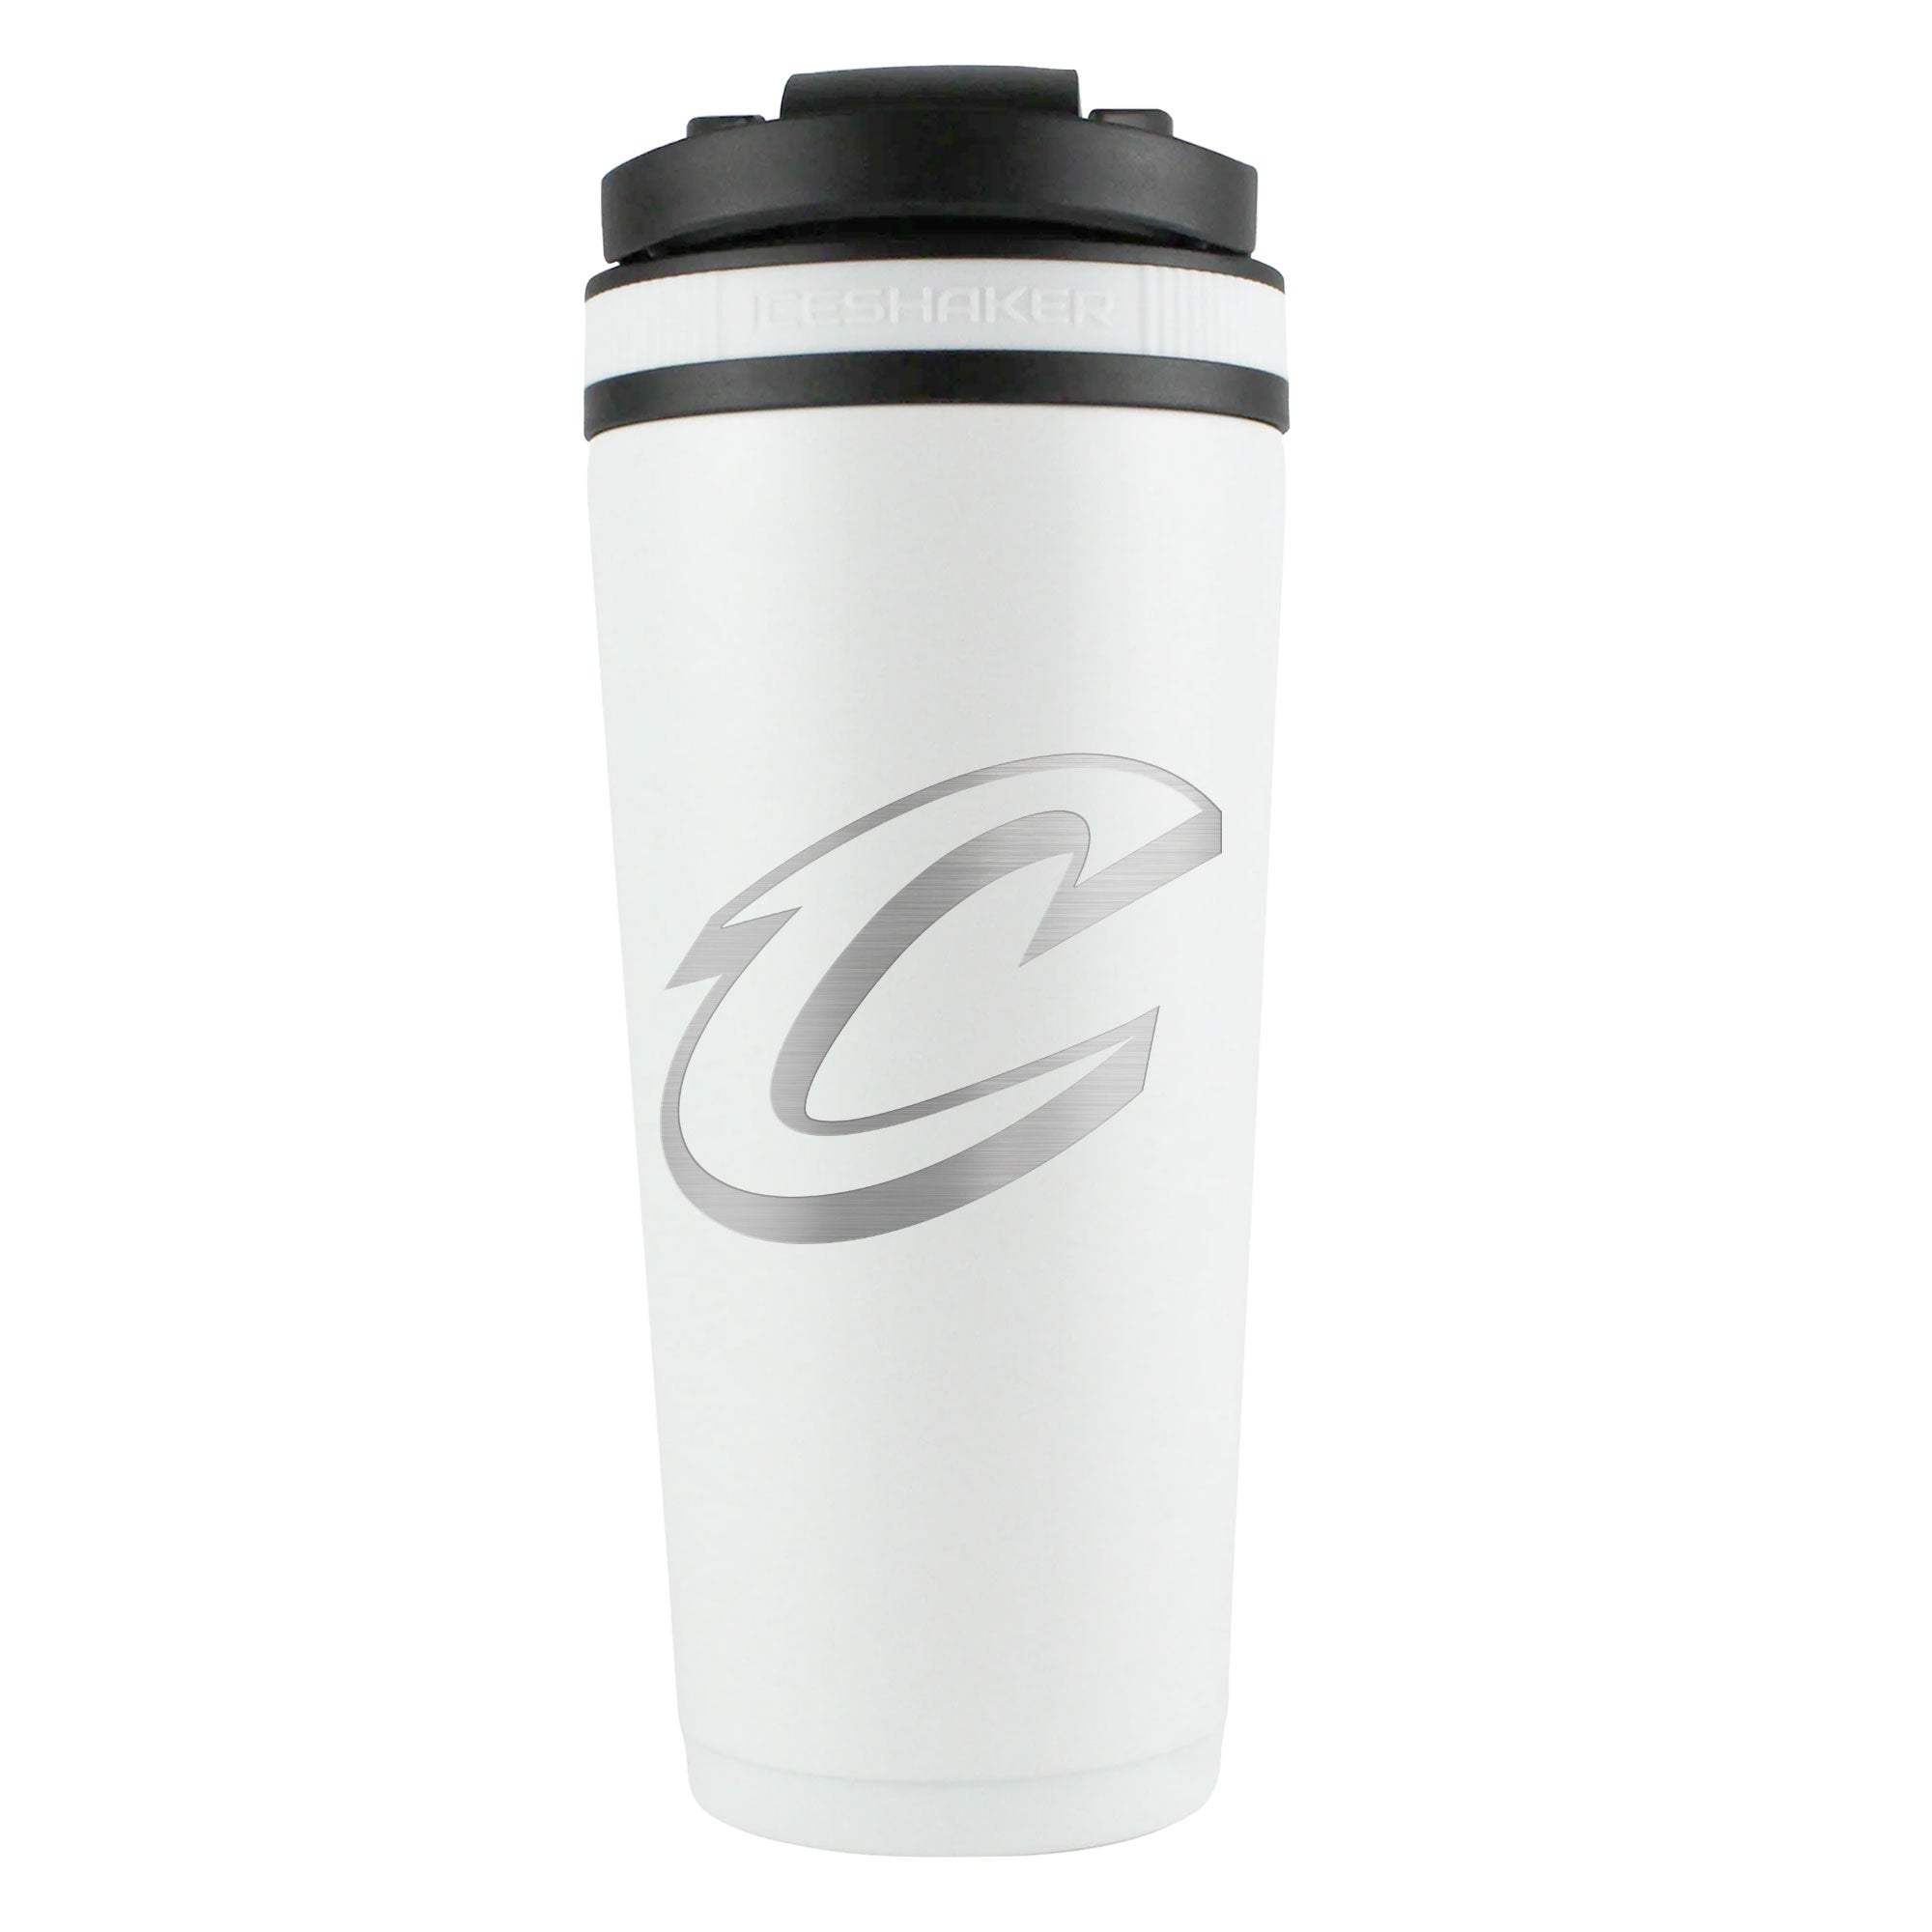 Officially Licensed Cleveland Cavaliers 26oz Ice Shaker - White